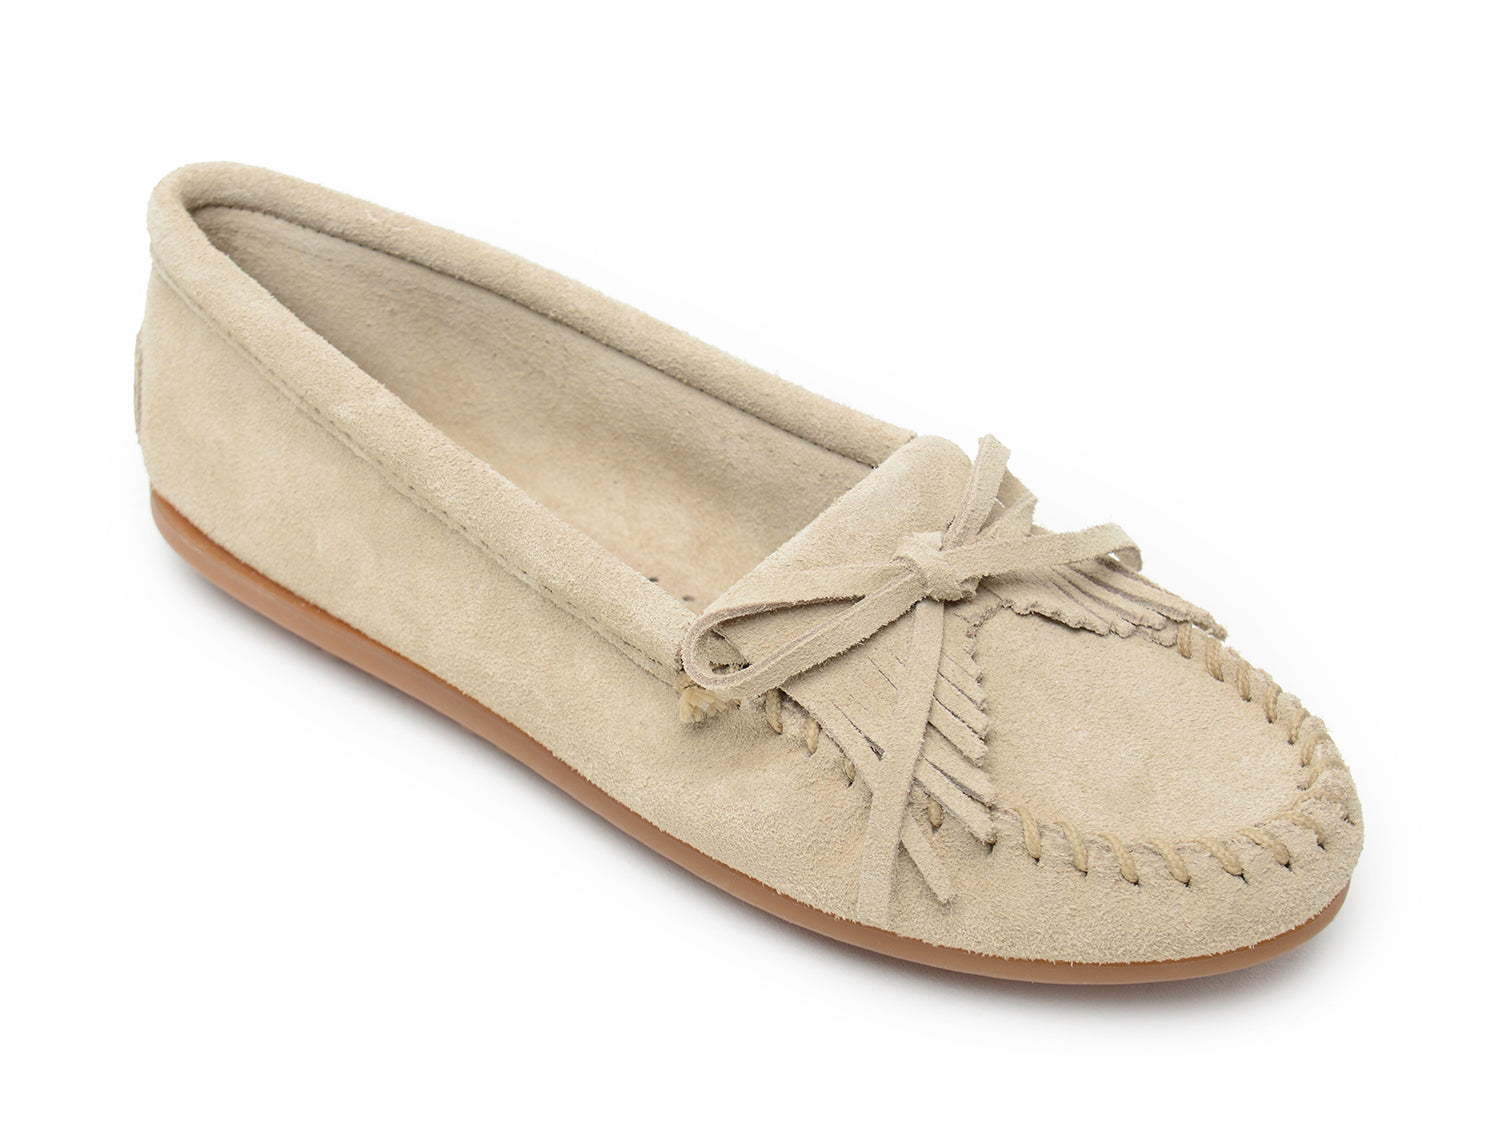 Kilty Hardsole Moccasin in Stone from 3/4 Angle View